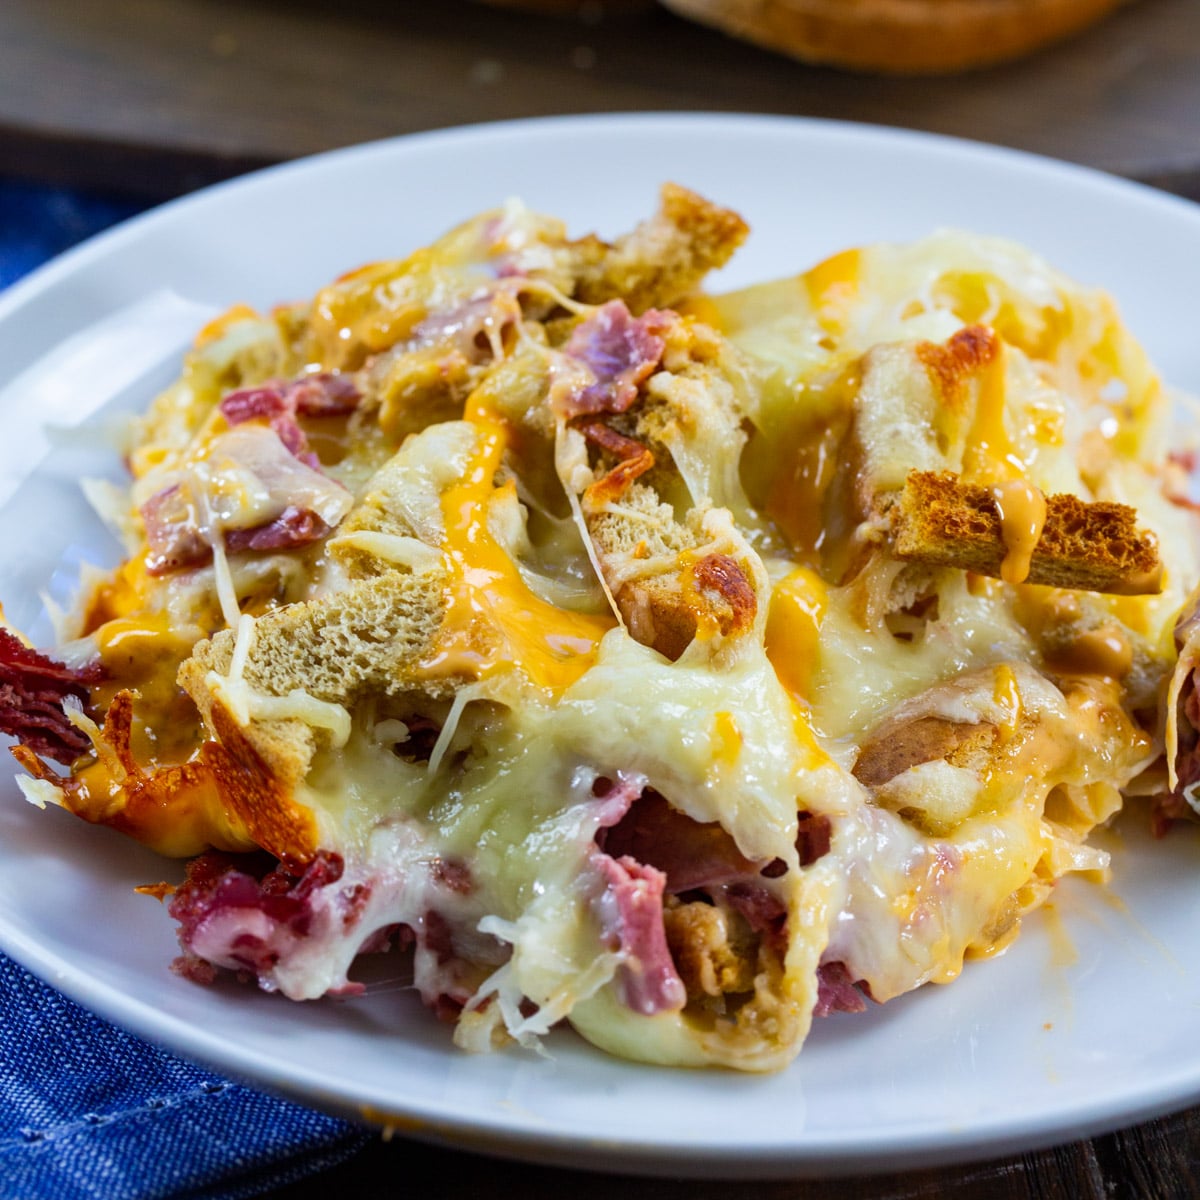 Reuben Casserole dished up on a plate.